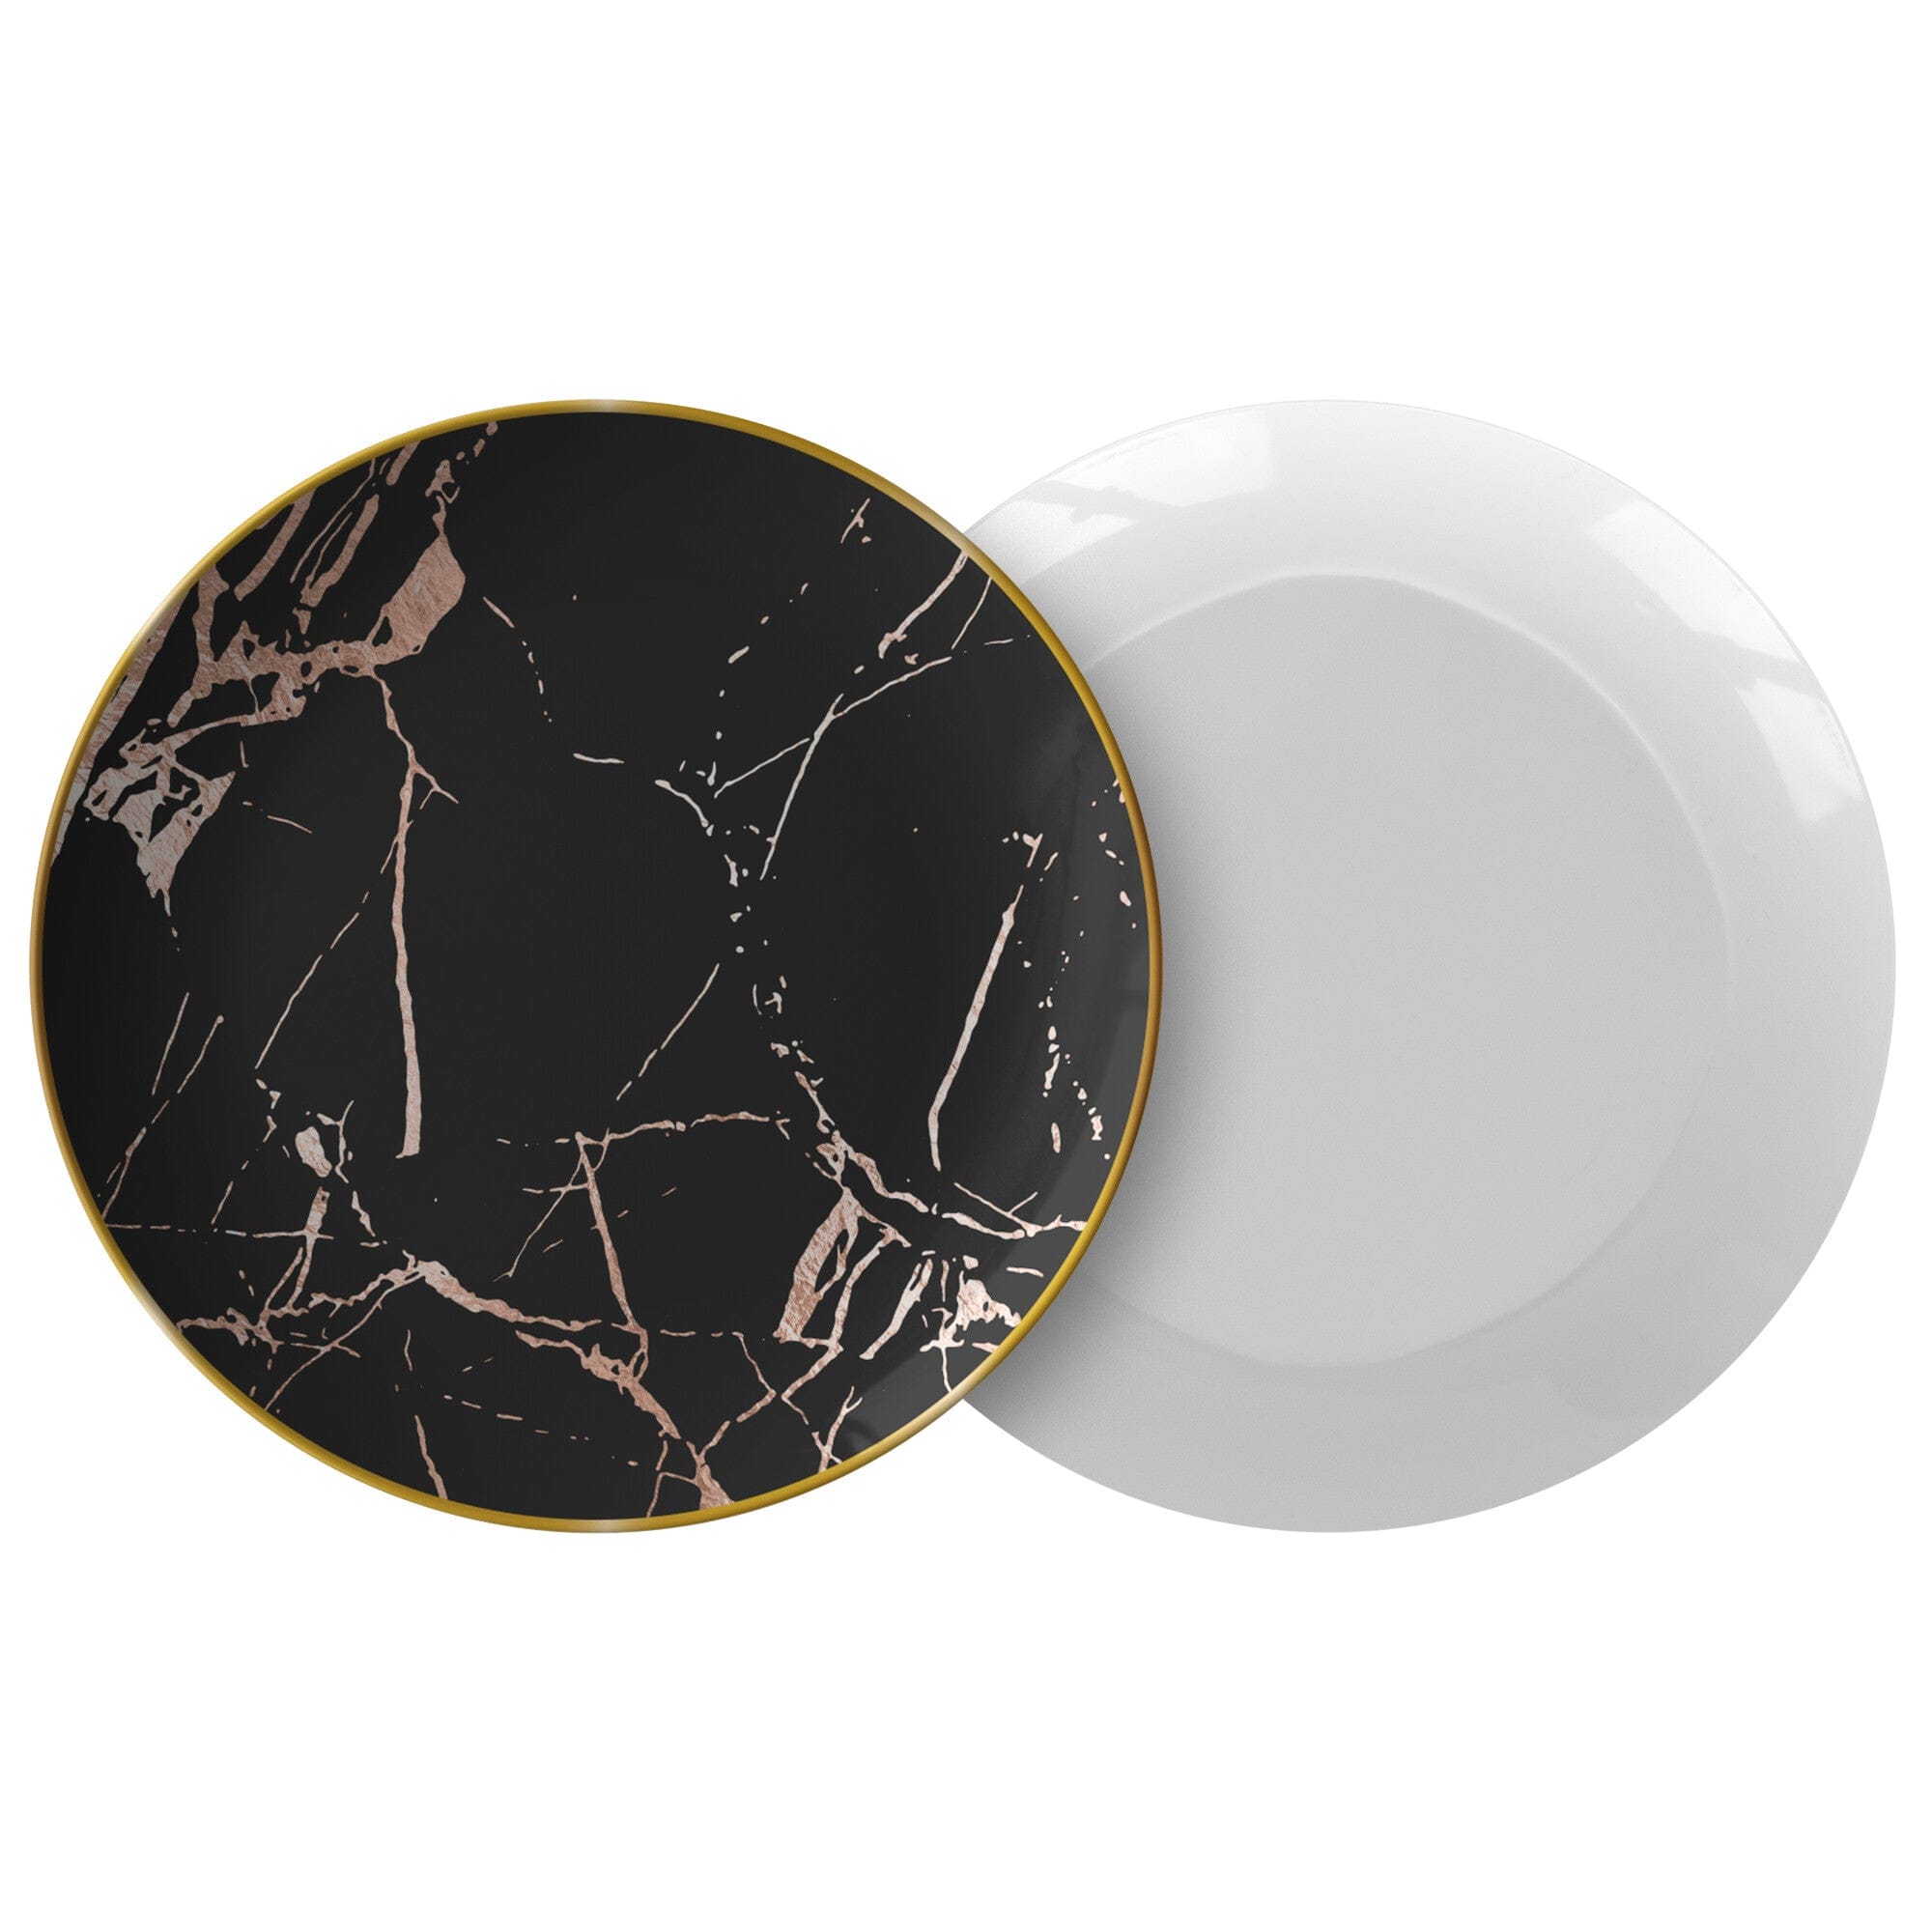 Kate McEnroe New York Dinner Plates in Luxurious Black &amp; Gold Marble Veins with Gold Rim Plates